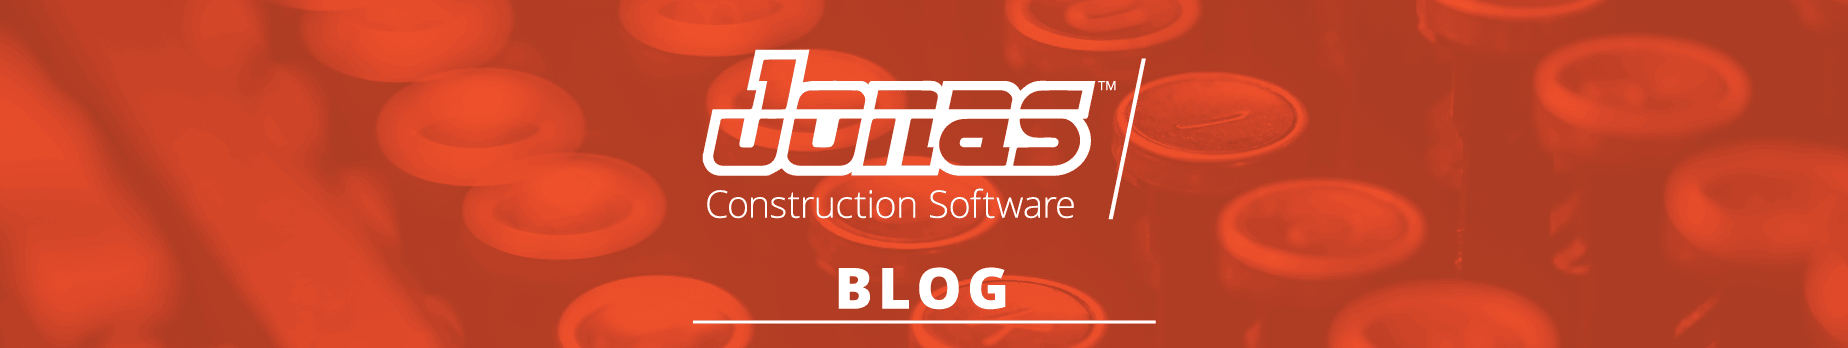 This image showcases the logo and text of "Jonas Construction Software Blog" positioned centrally against a blurry backdrop filled with orange safety helmets. The picture conveys a construction-related theme and points towards industry-specific content on the blog.